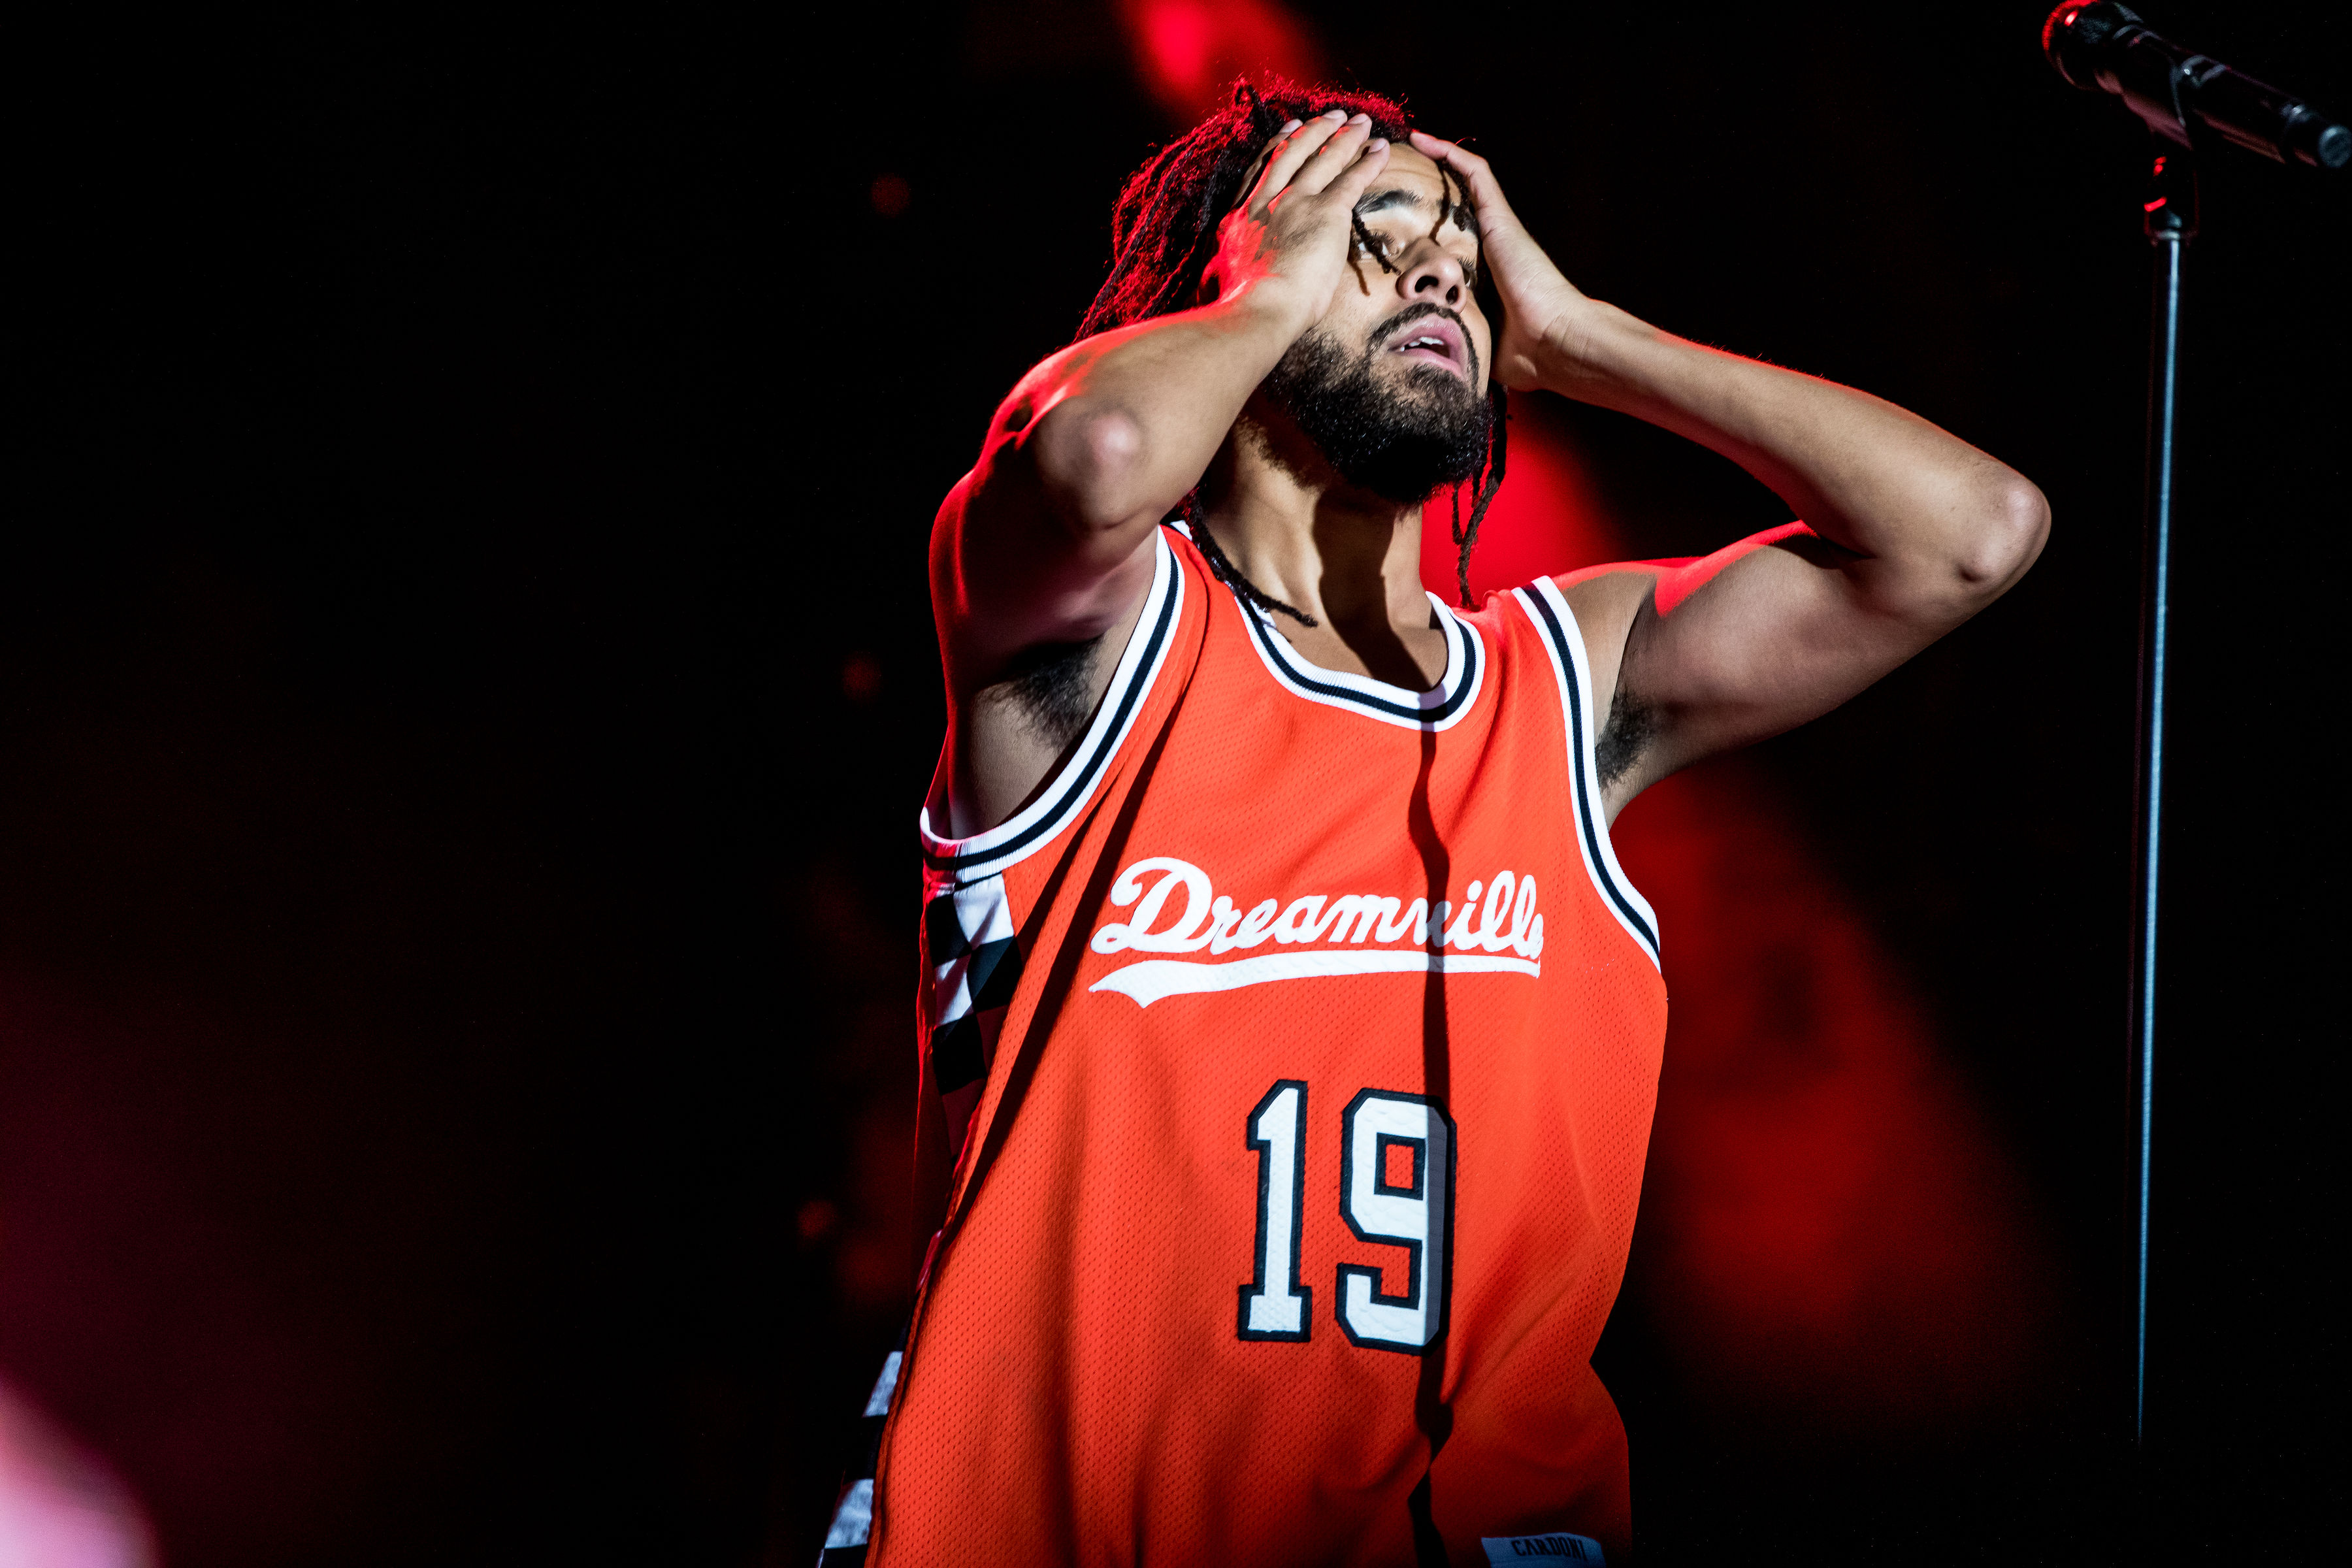 J Cole Officially Cancels DreamvilleFest 2020 Due To The COVID-19 Pandemic